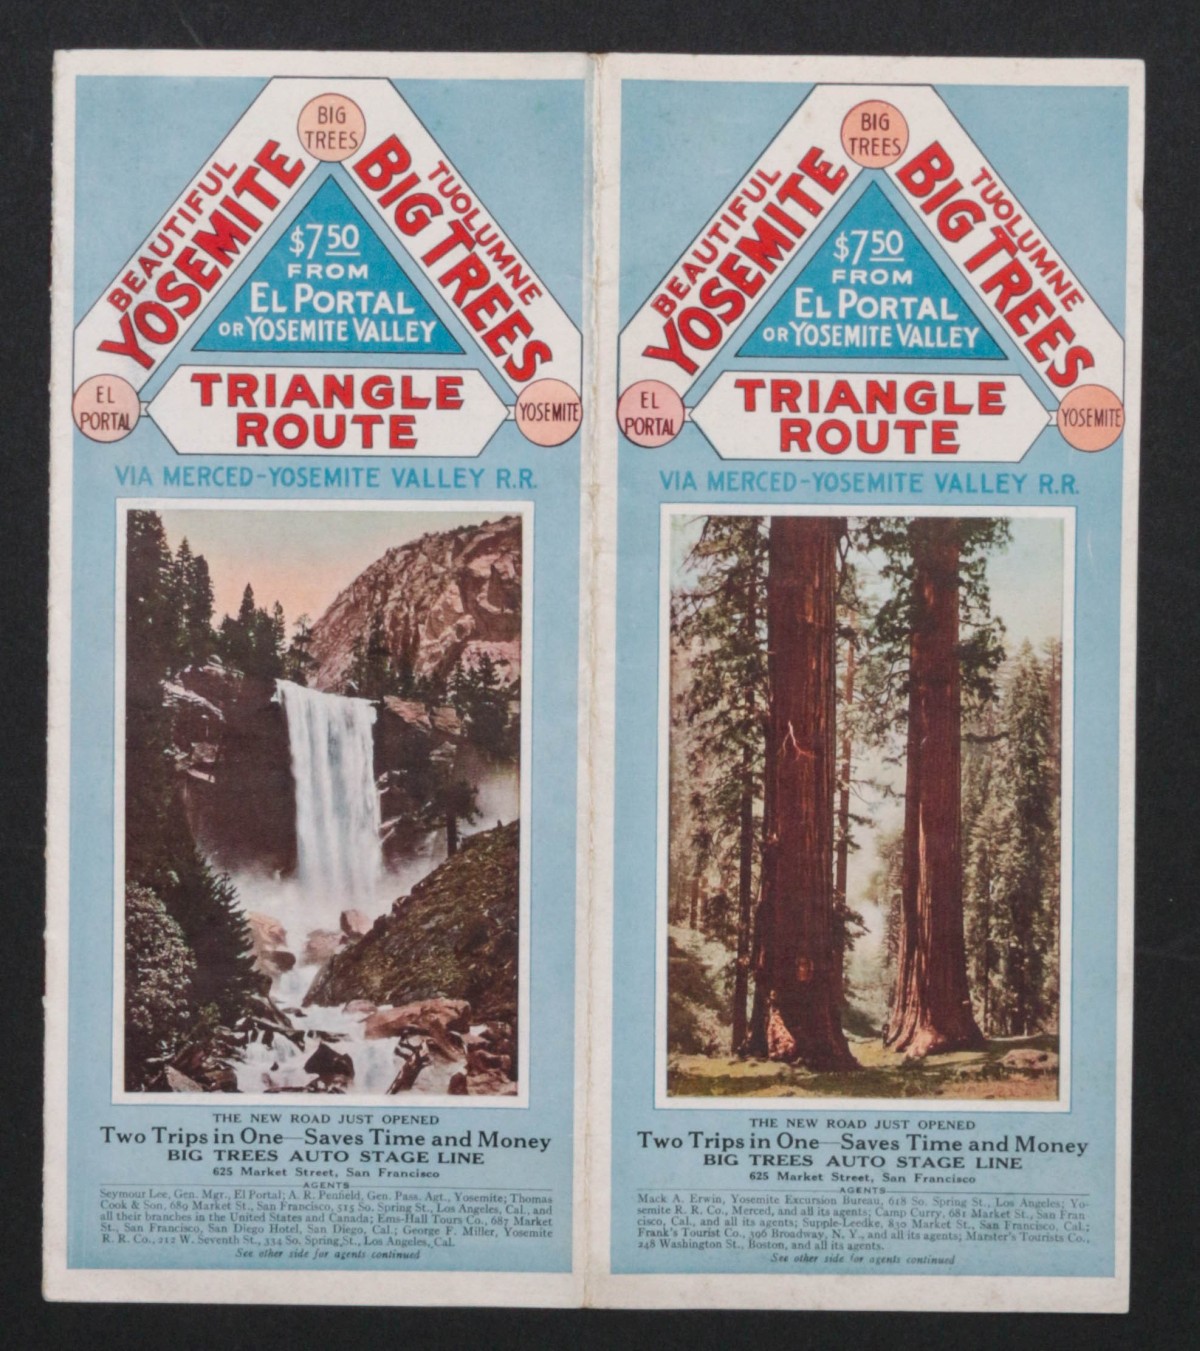 MERCED-YOSEMITE VALLEY R.R. TIMETABLE, NO DATE